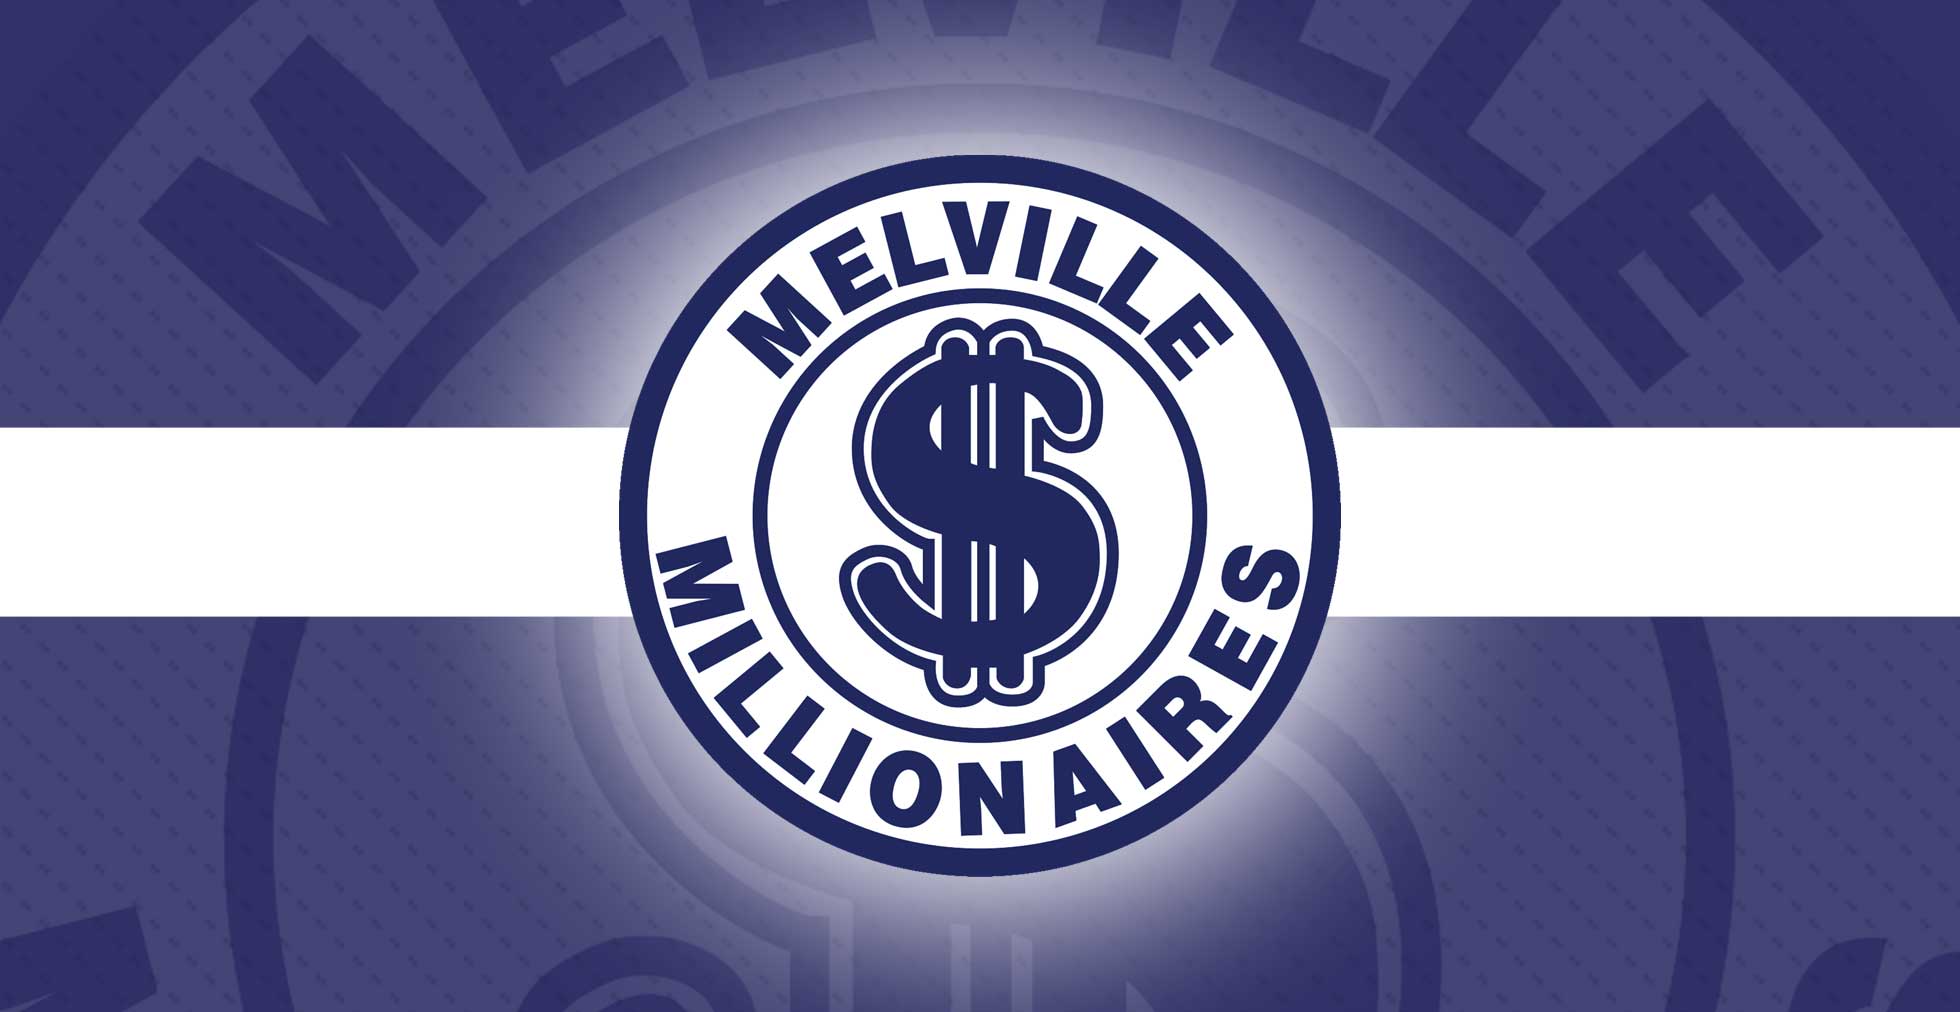 JOB POSTING: Millionaires accepting applications for assistant coach